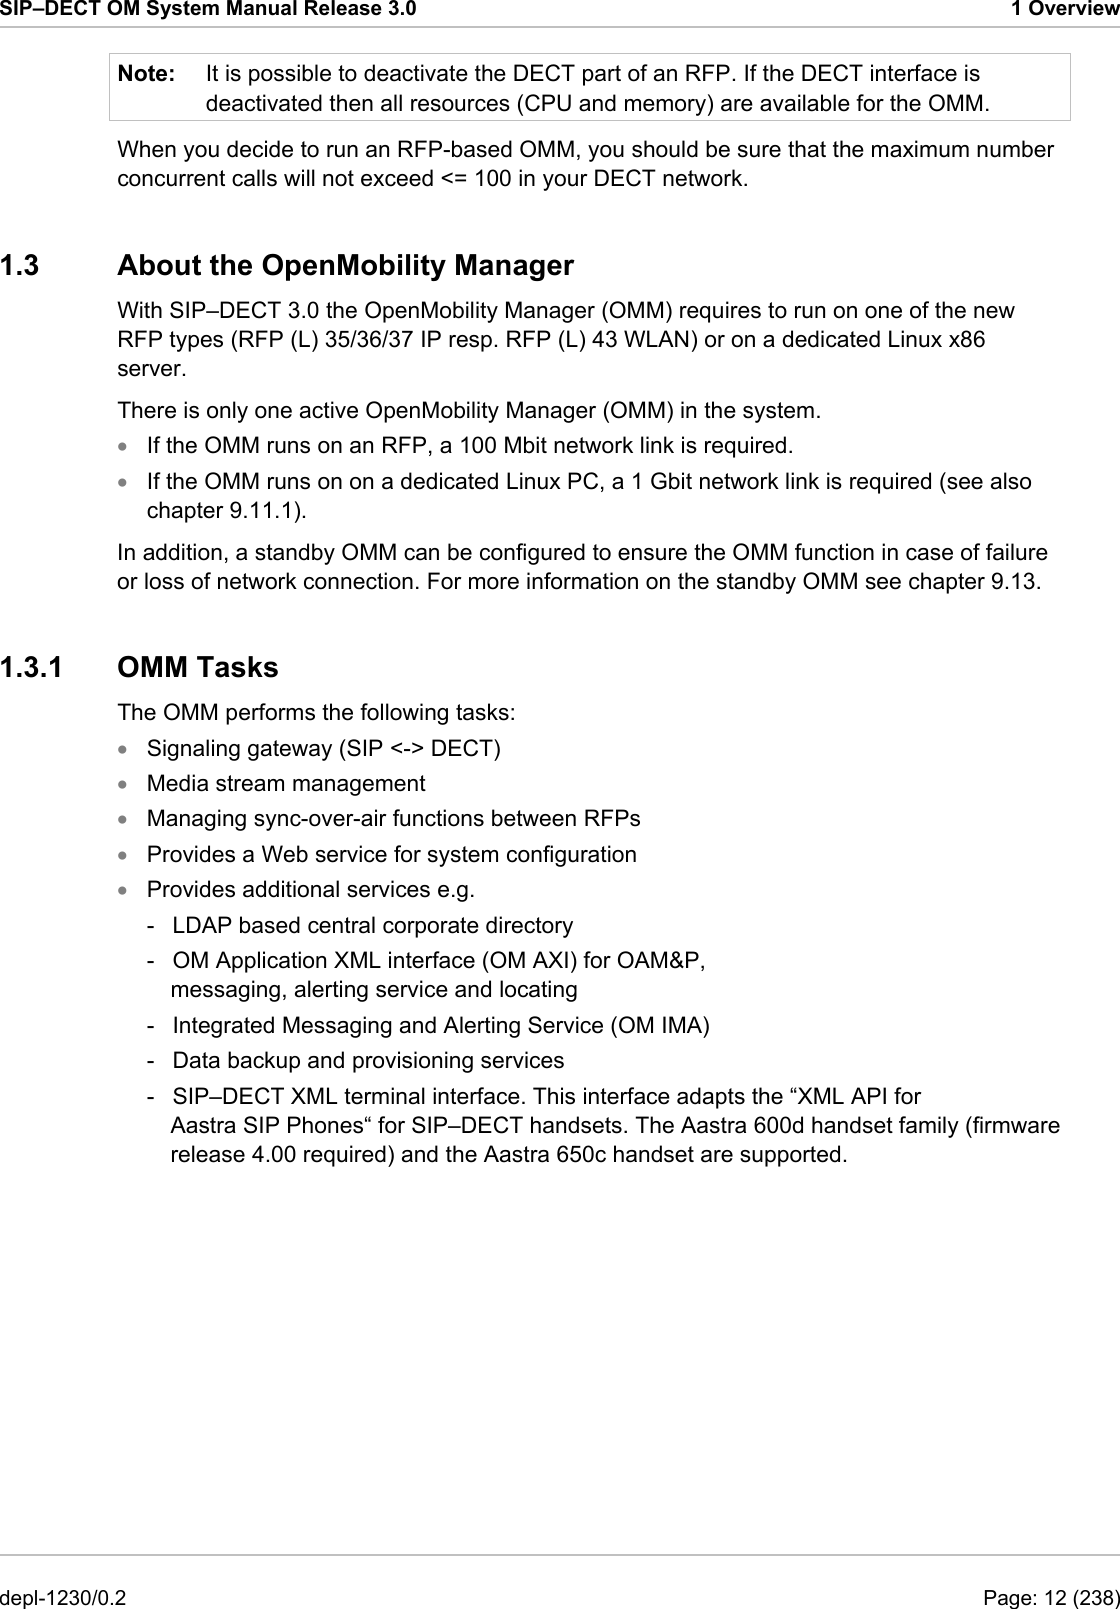 SIP–DECT OM System Manual Release 3.0  1 Overview Note:  It is possible to deactivate the DECT part of an RFP. If the DECT interface is deactivated then all resources (CPU and memory) are available for the OMM.  When you decide to run an RFP-based OMM, you should be sure that the maximum number concurrent calls will not exceed &lt;= 100 in your DECT network. 1.3  About the OpenMobility Manager With SIP–DECT 3.0 the OpenMobility Manager (OMM) requires to run on one of the new RFP types (RFP (L) 35/36/37 IP resp. RFP (L) 43 WLAN) or on a dedicated Linux x86 server. There is only one active OpenMobility Manager (OMM) in the system.  If the OMM runs on an RFP, a 100 Mbit network link is required. • • • • • • • If the OMM runs on on a dedicated Linux PC, a 1 Gbit network link is required (see also chapter 9.11.1). In addition, a standby OMM can be configured to ensure the OMM function in case of failure or loss of network connection. For more information on the standby OMM see chapter 9.13.  1.3.1 OMM Tasks The OMM performs the following tasks:  Signaling gateway (SIP &lt;-&gt; DECT)  Media stream management  Managing sync-over-air functions between RFPs  Provides a Web service for system configuration  Provides additional services e.g.  -  LDAP based central corporate directory  -  OM Application XML interface (OM AXI) for OAM&amp;P, messaging, alerting service and locating  -  Integrated Messaging and Alerting Service (OM IMA)  -  Data backup and provisioning services  -  SIP–DECT XML terminal interface. This interface adapts the “XML API for Aastra SIP Phones“ for SIP–DECT handsets. The Aastra 600d handset family (firmware release 4.00 required) and the Aastra 650c handset are supported.  depl-1230/0.2  Page: 12 (238) 